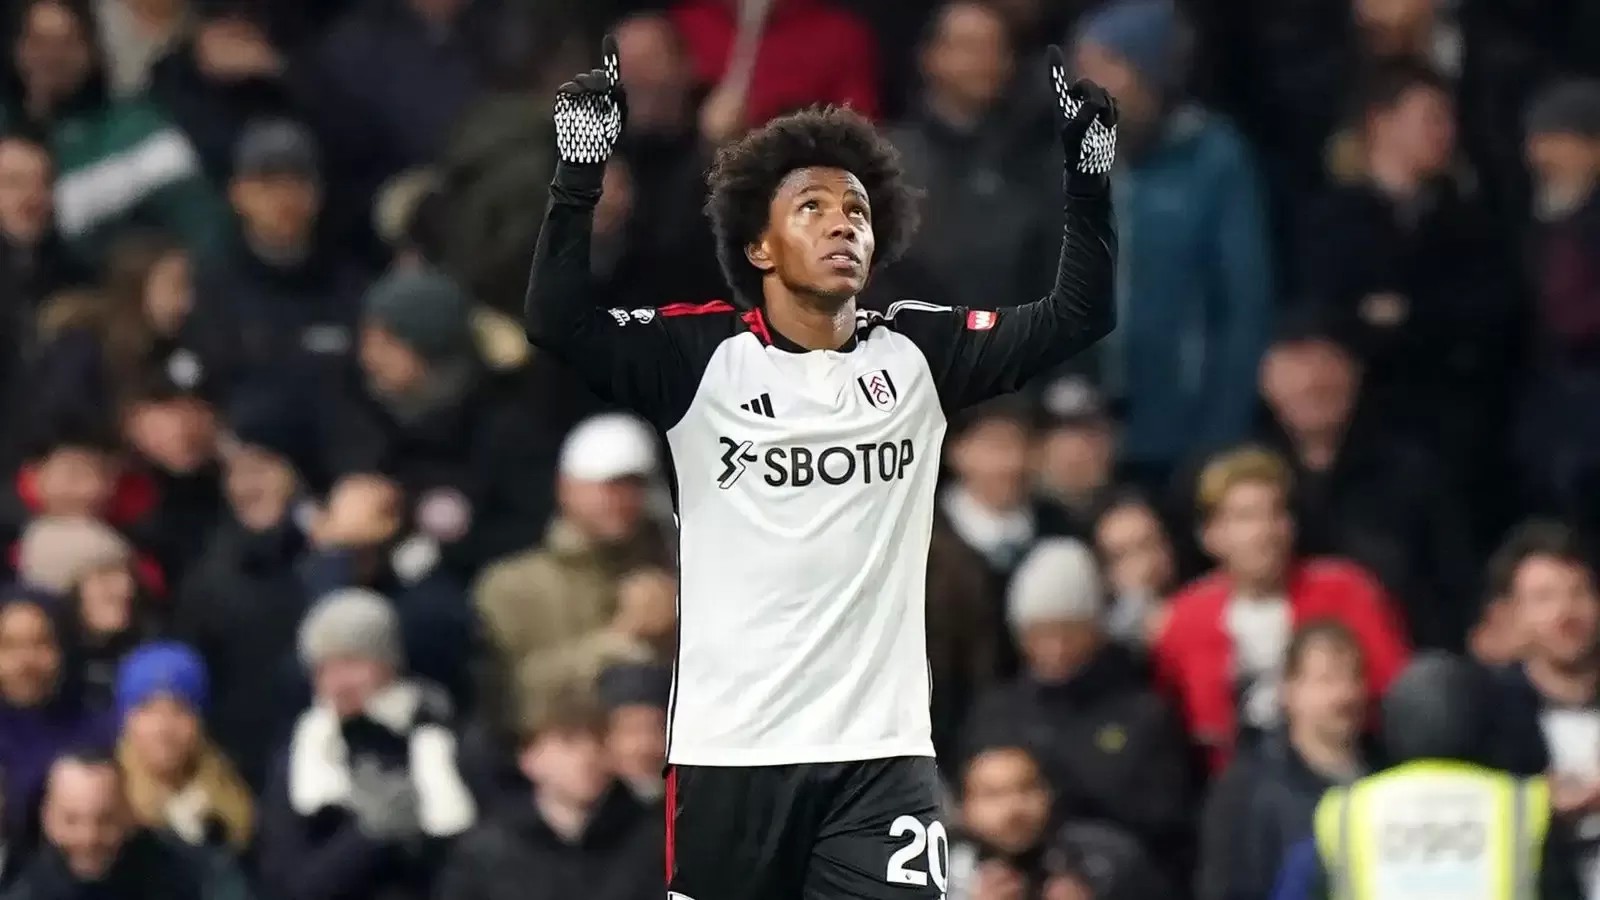 Fulham 3-2 Wolves: Willian scores two, including 94th-minute winner, to down O’Neil’s men